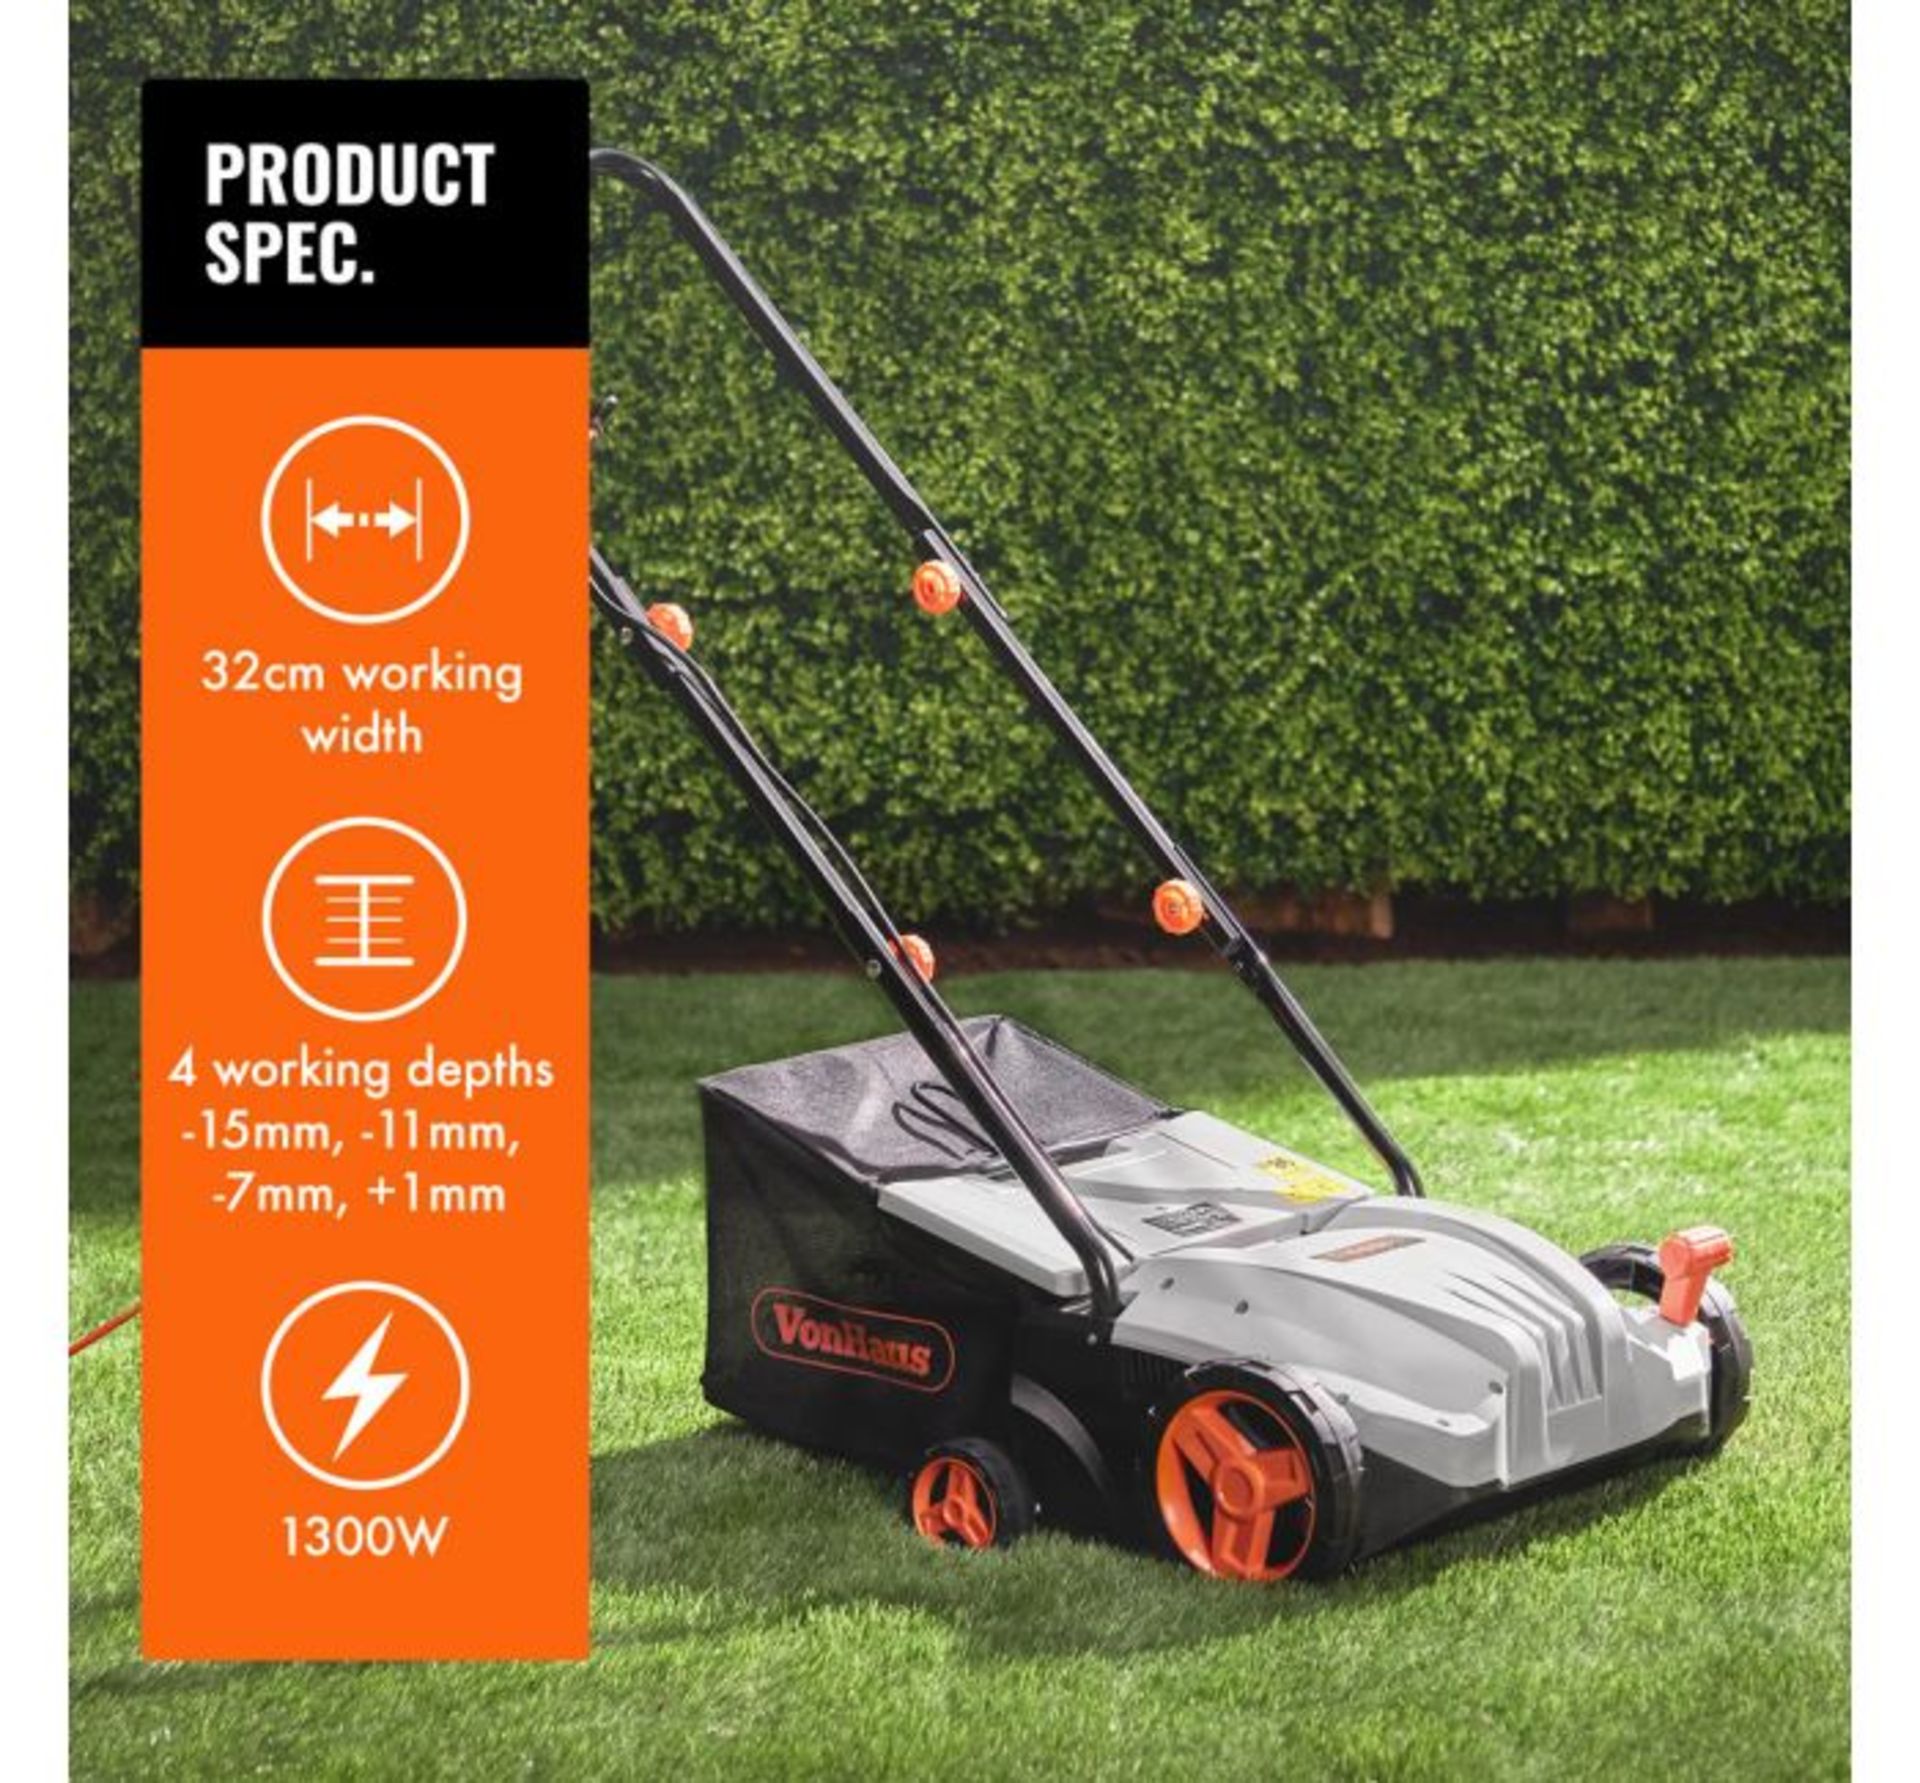 (HZ119) 1300W Lawn Rake Working width of 32cm is ideal for clearing small to mid-size lawns qu...